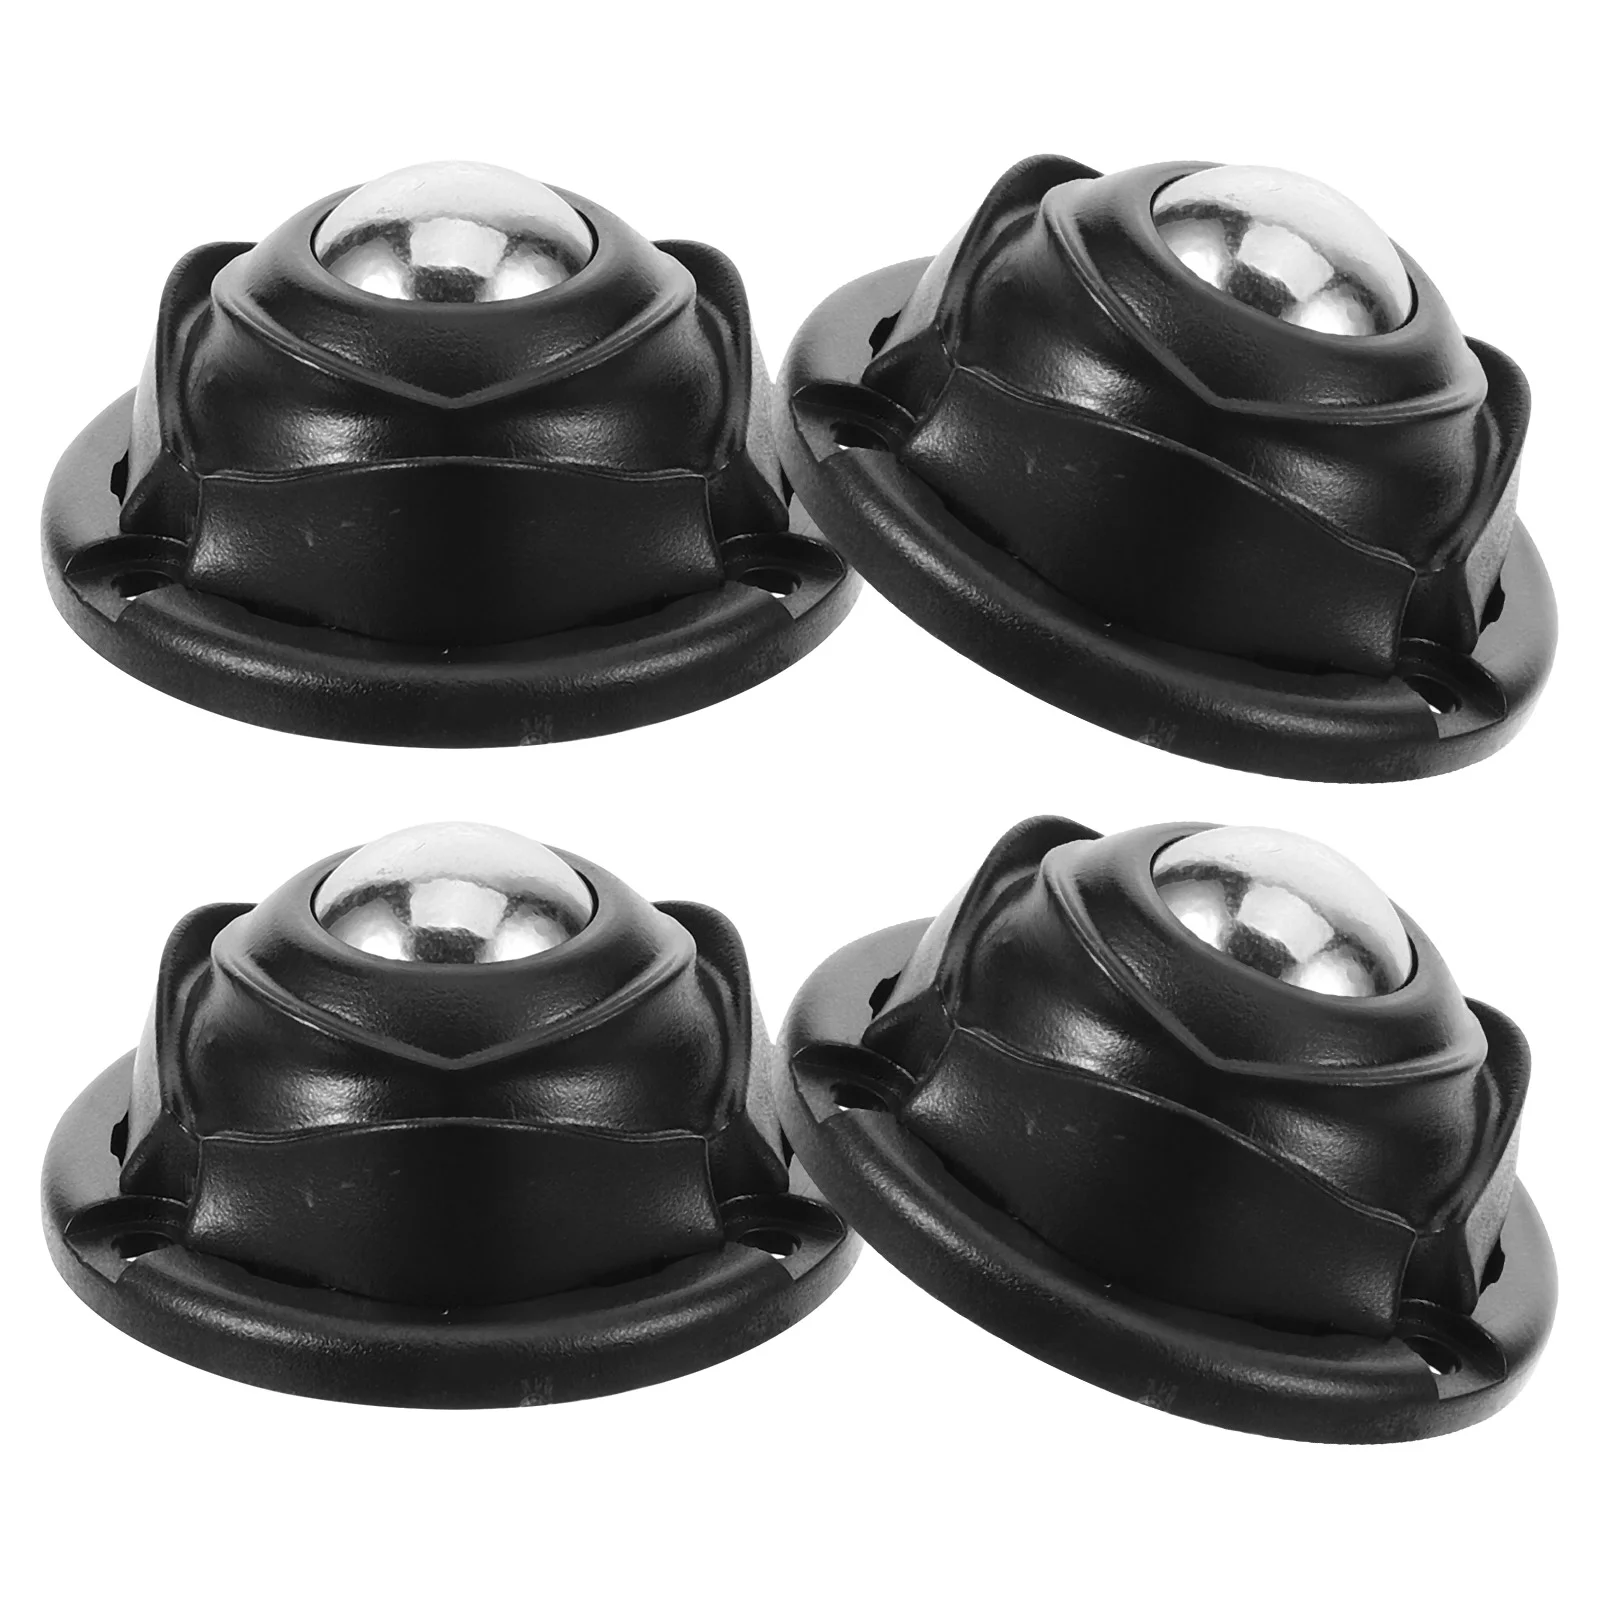 

4 Pcs Self Adhesive Casters Swivel Wheels for Small Appliances Roses No Punching Kitchen Mini Plastic Steel Trash Can